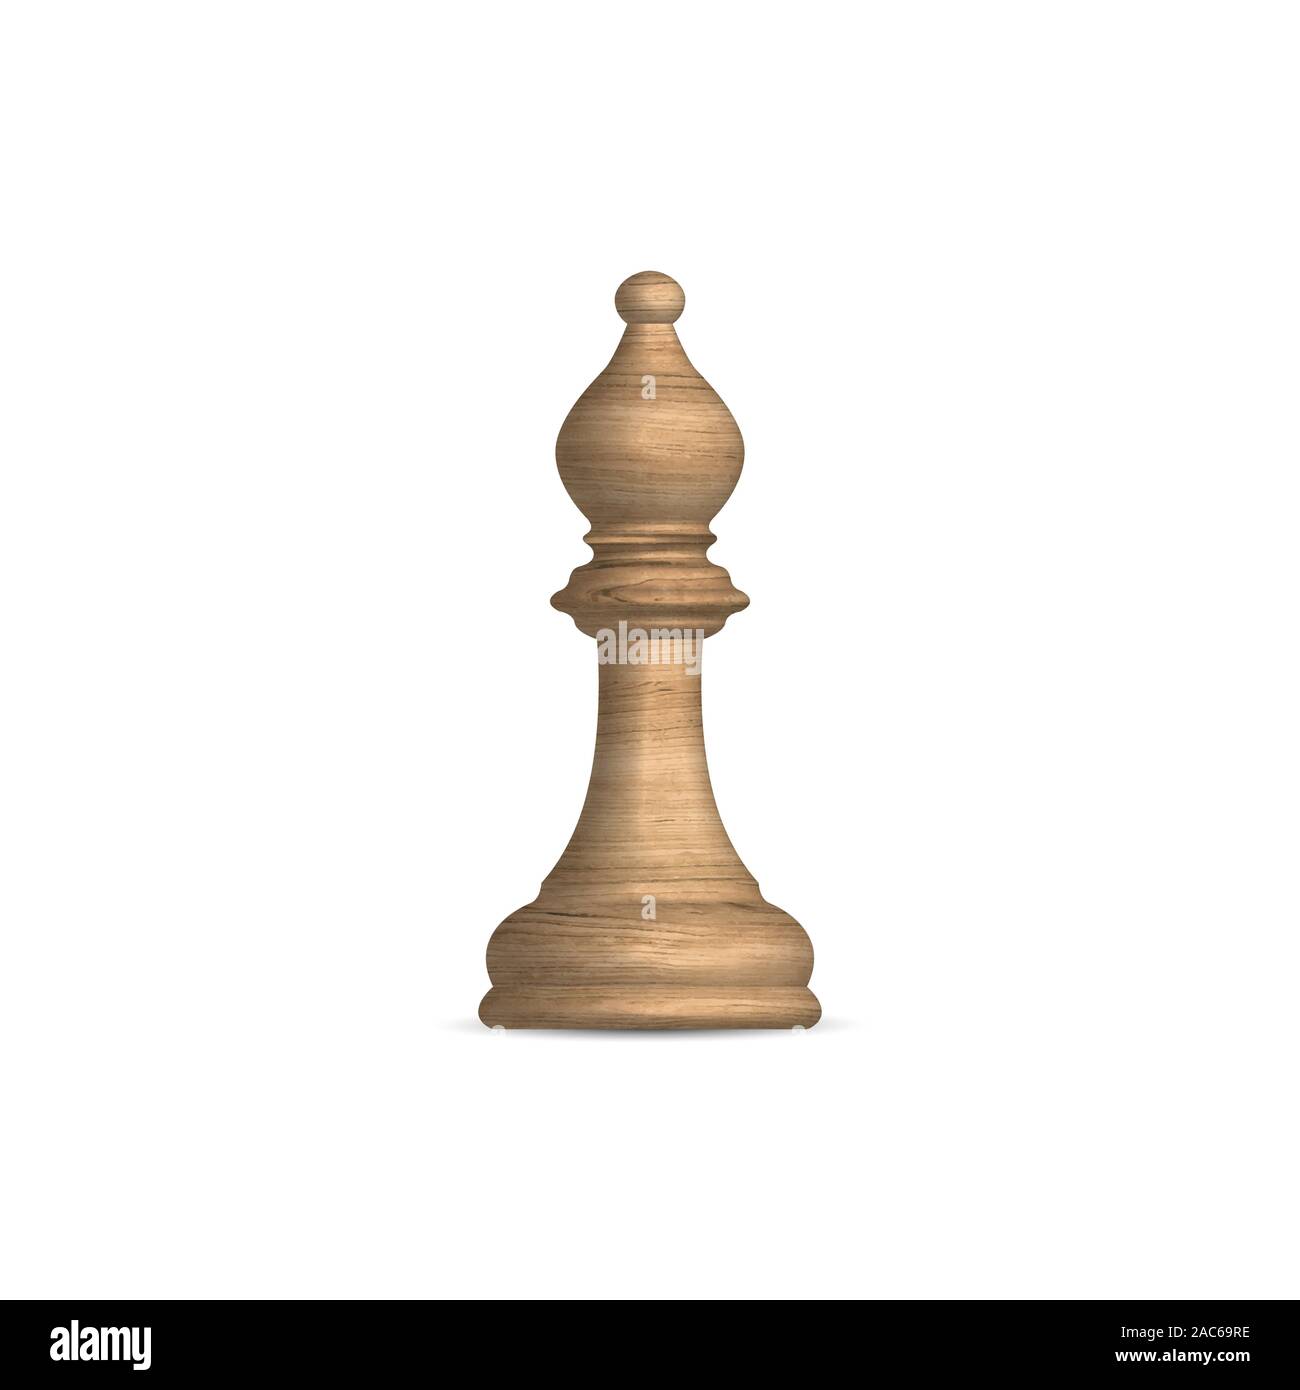 Two chess pieces - pawns made from lacquered wood Vector Image